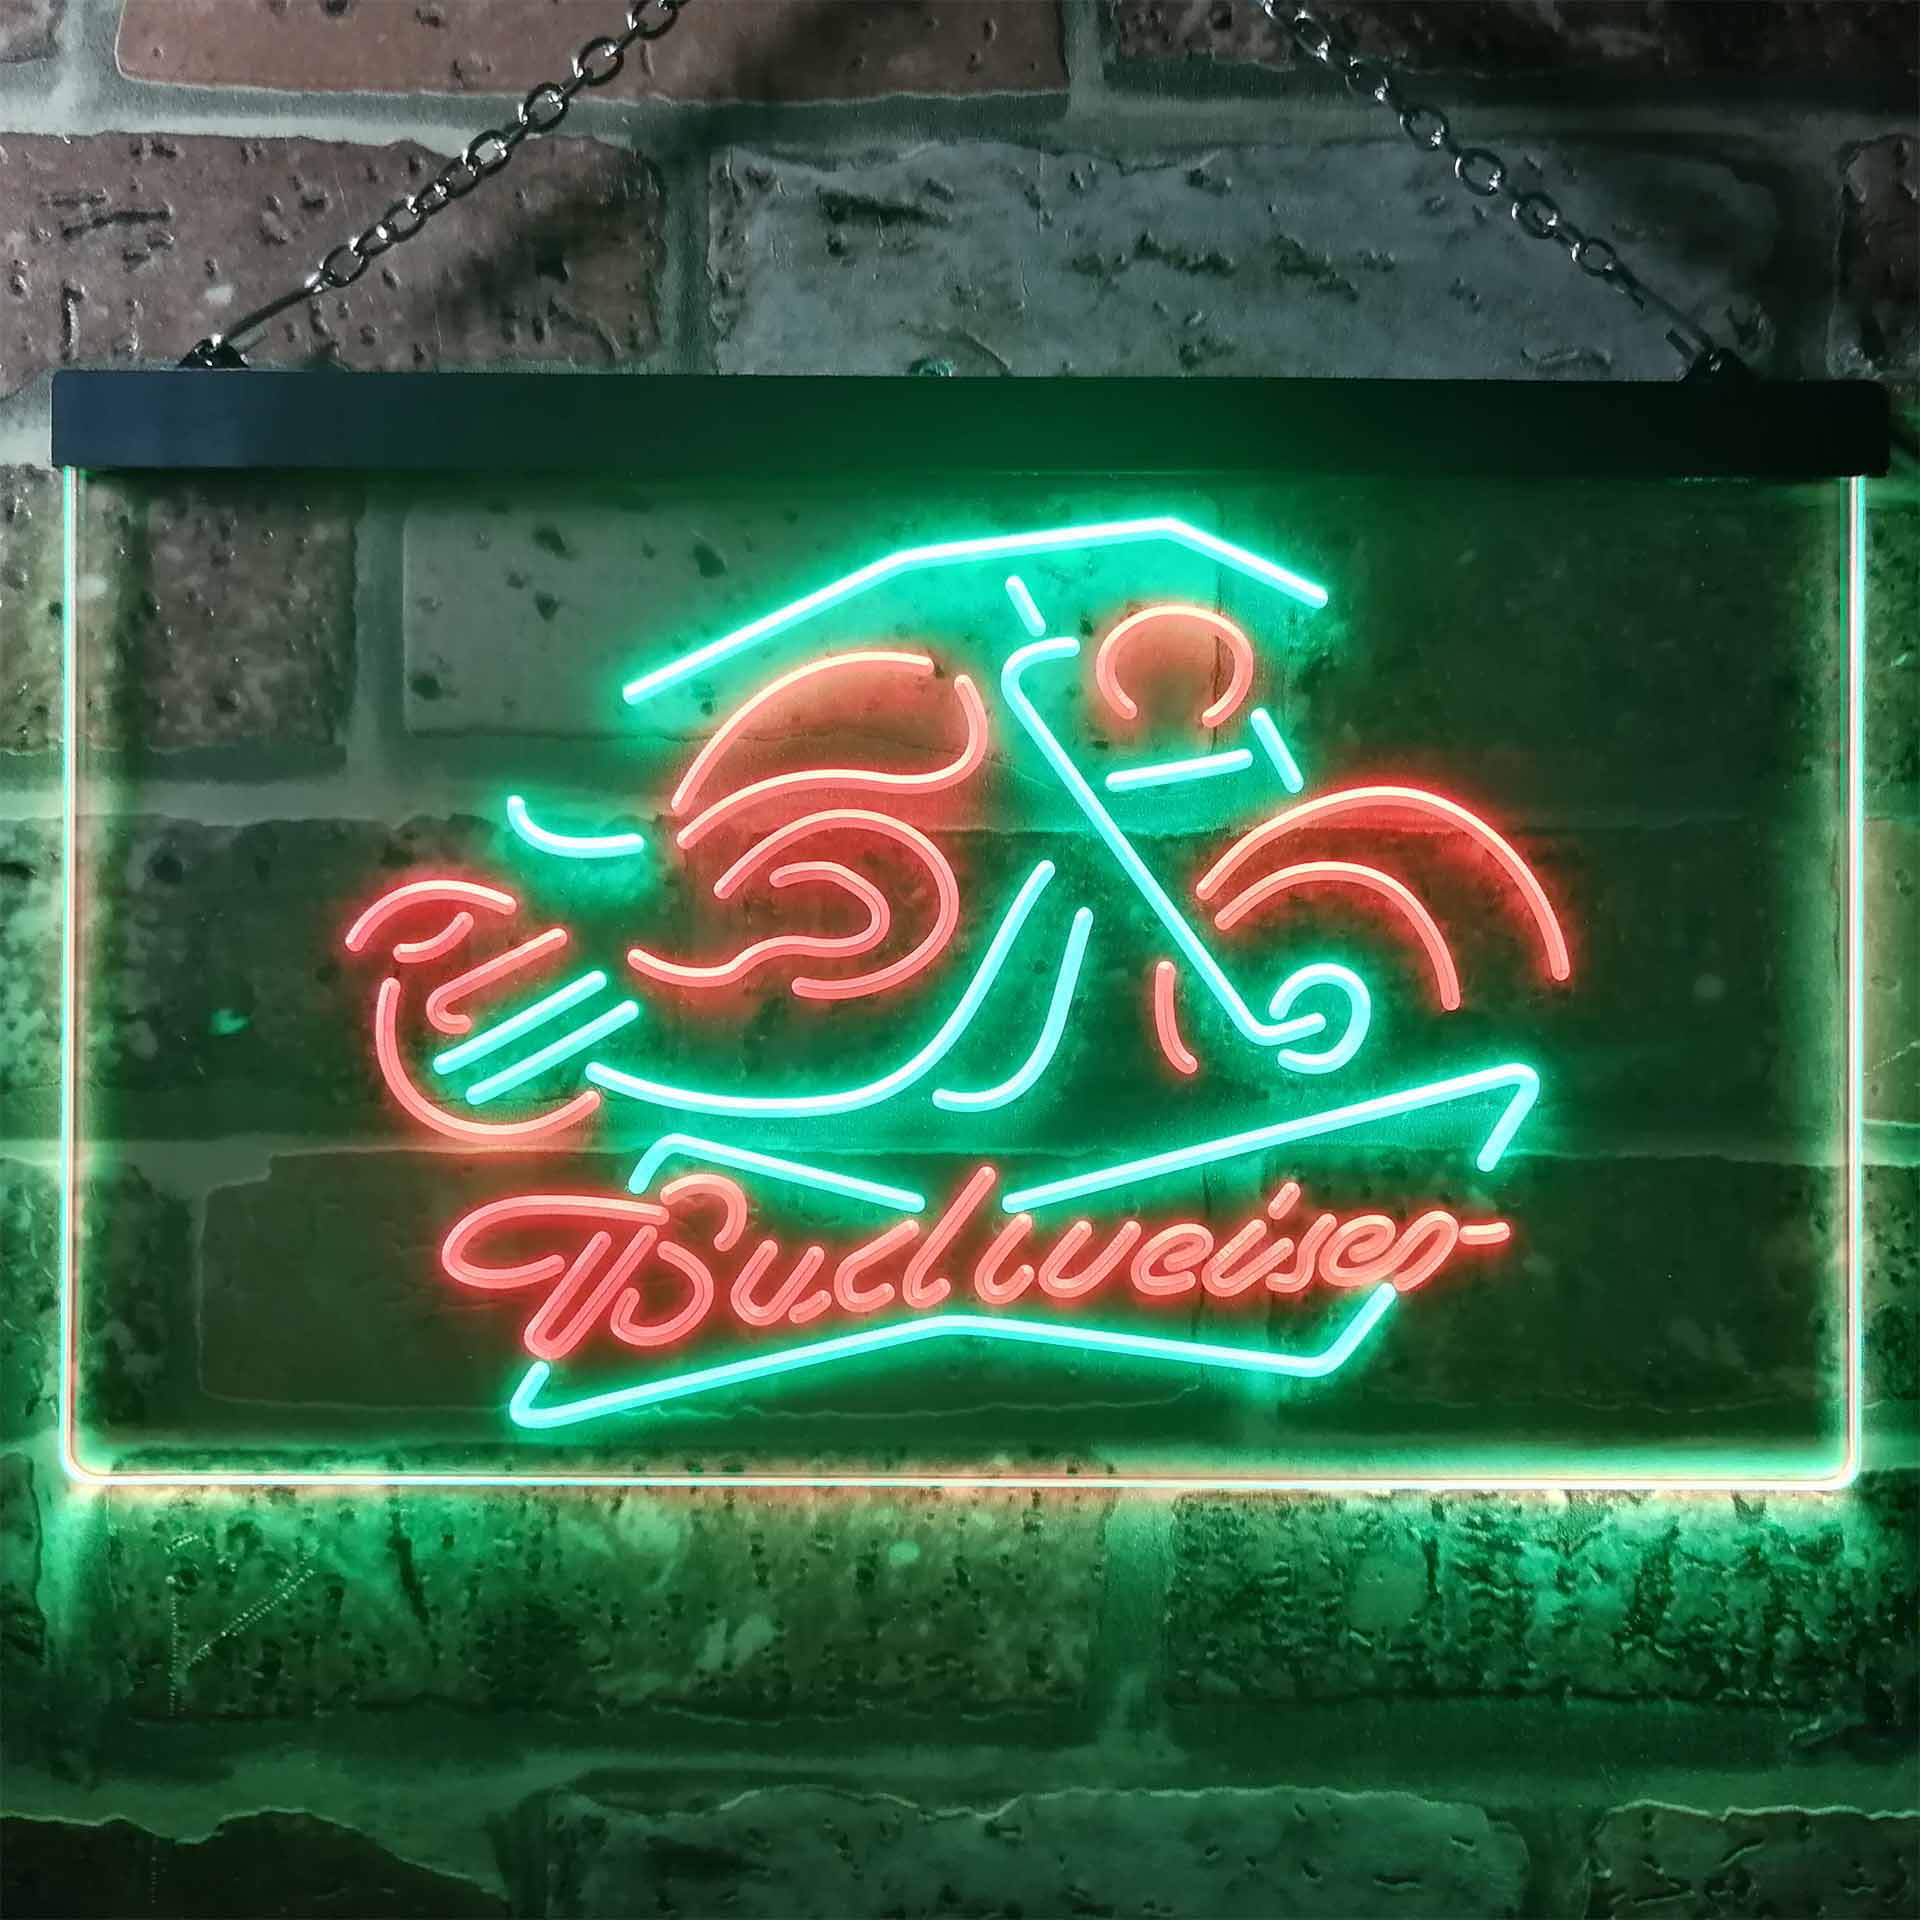 Budweiser Beer Motorcycle Neon LED Sign